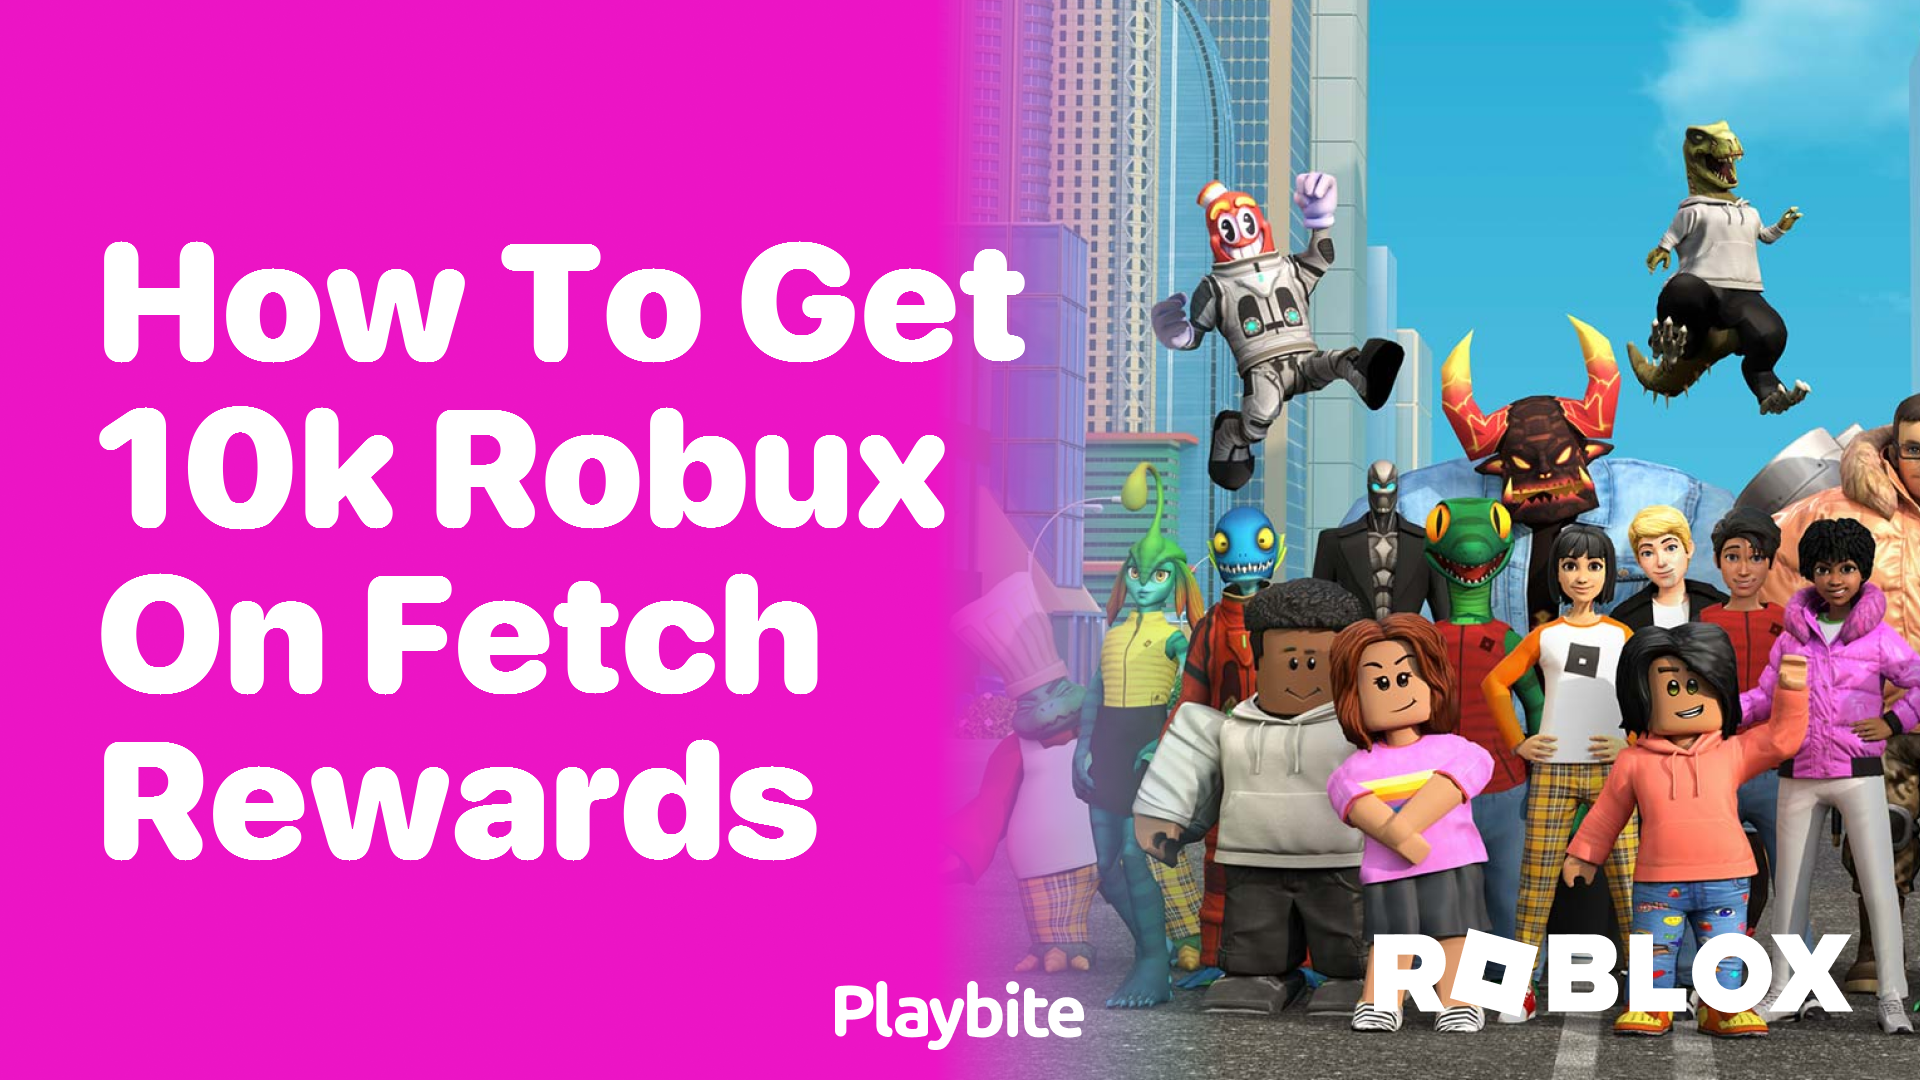 How to get 10k Robux on Fetch Rewards